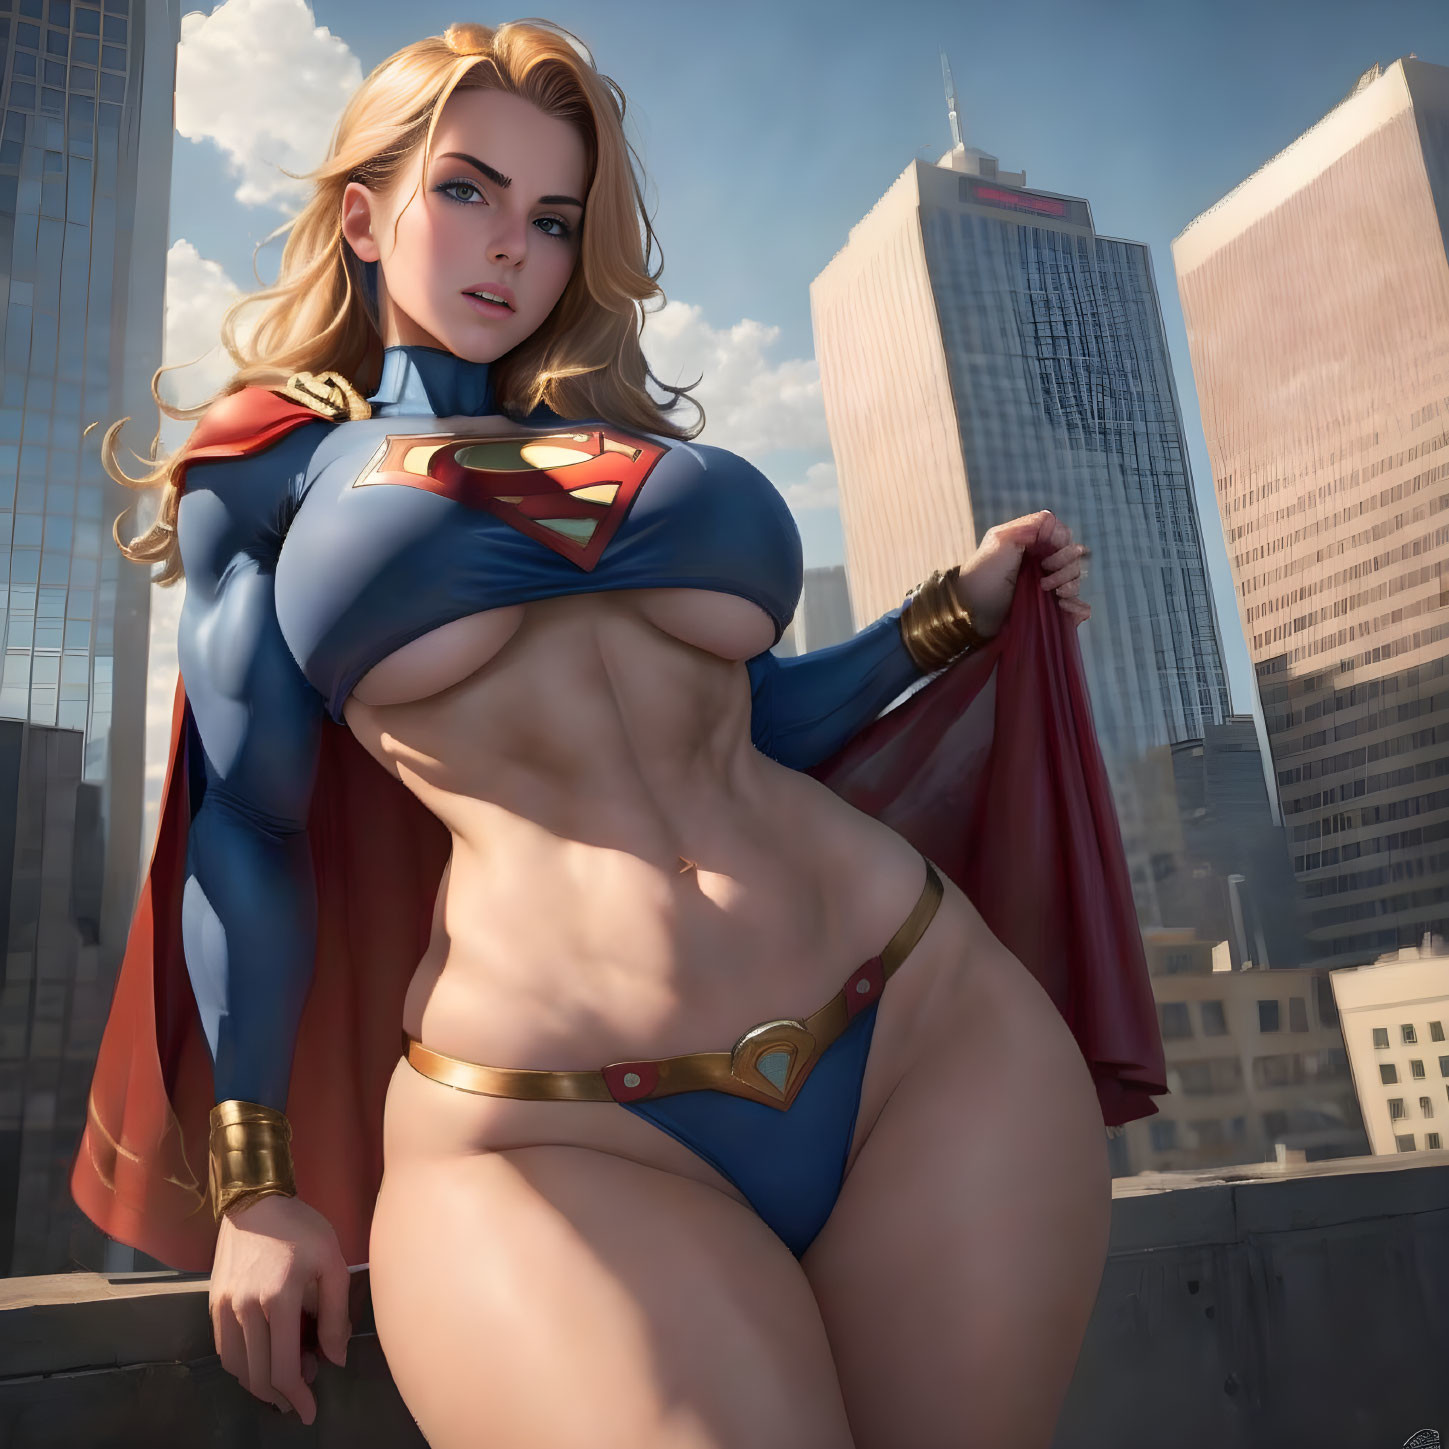 Supergirl new and better outfit - Rule 34 AI Art